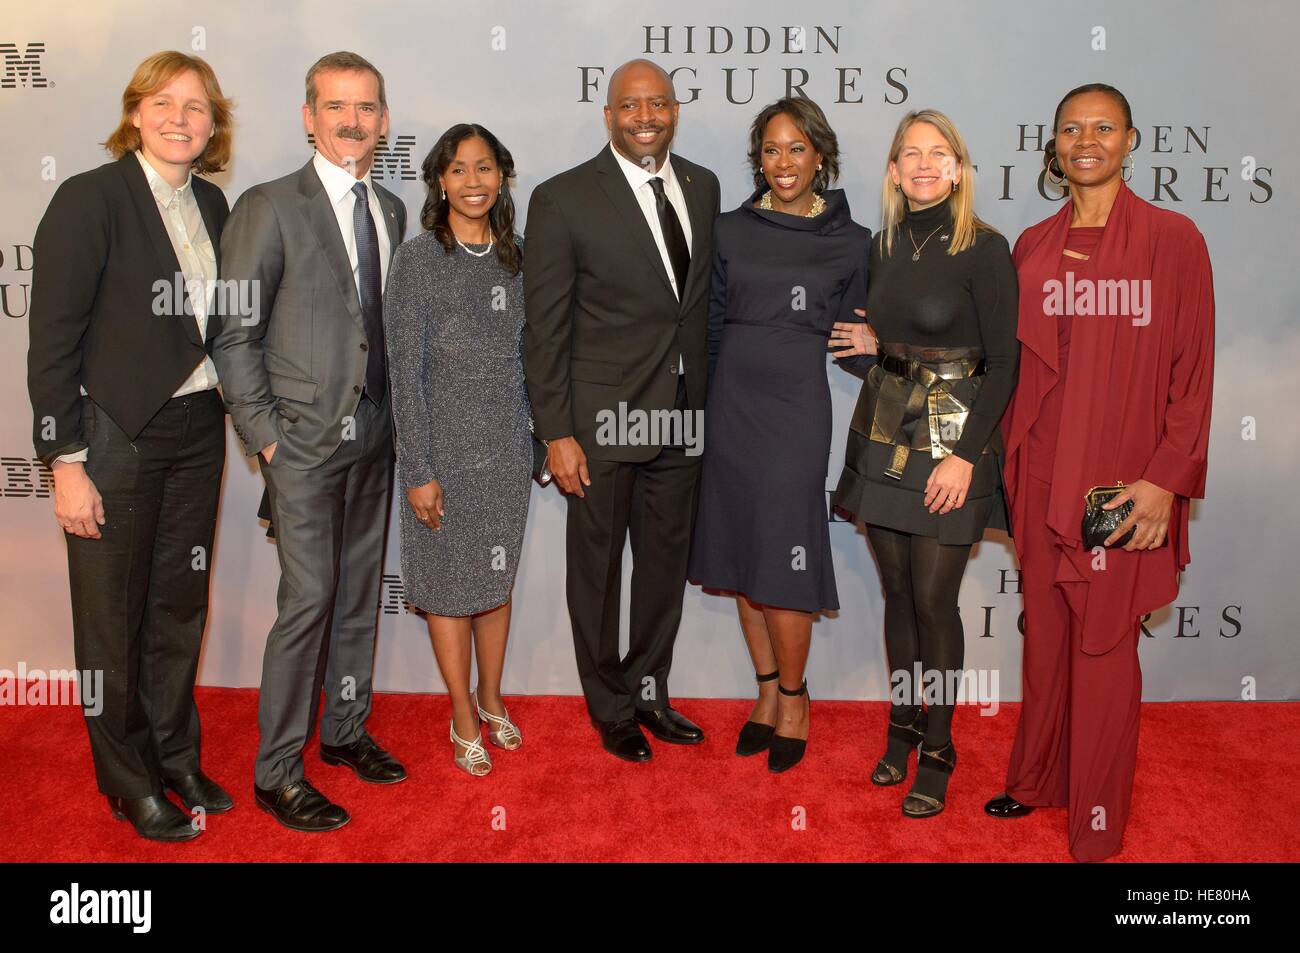 U.S. Chief Technology Officer Megan Smith (left), Canadian astronaut Chris Hadfield, NASA astronaut Stephanie Wilson, former NASA astronaut Leland Melvin, author Margot Lee Shetterly, NASA Deputy Administrator Dava Newman, and NASA astronaut Yvonne Cagle walk the red carpet during the global celebration event for the film Hidden Figures at the SVA Theatre December 10, 2016 in New York City, New York. The film is based on the true story of the African-American women who worked as human computers during the Friendship 7 mission in 1962. Stock Photo